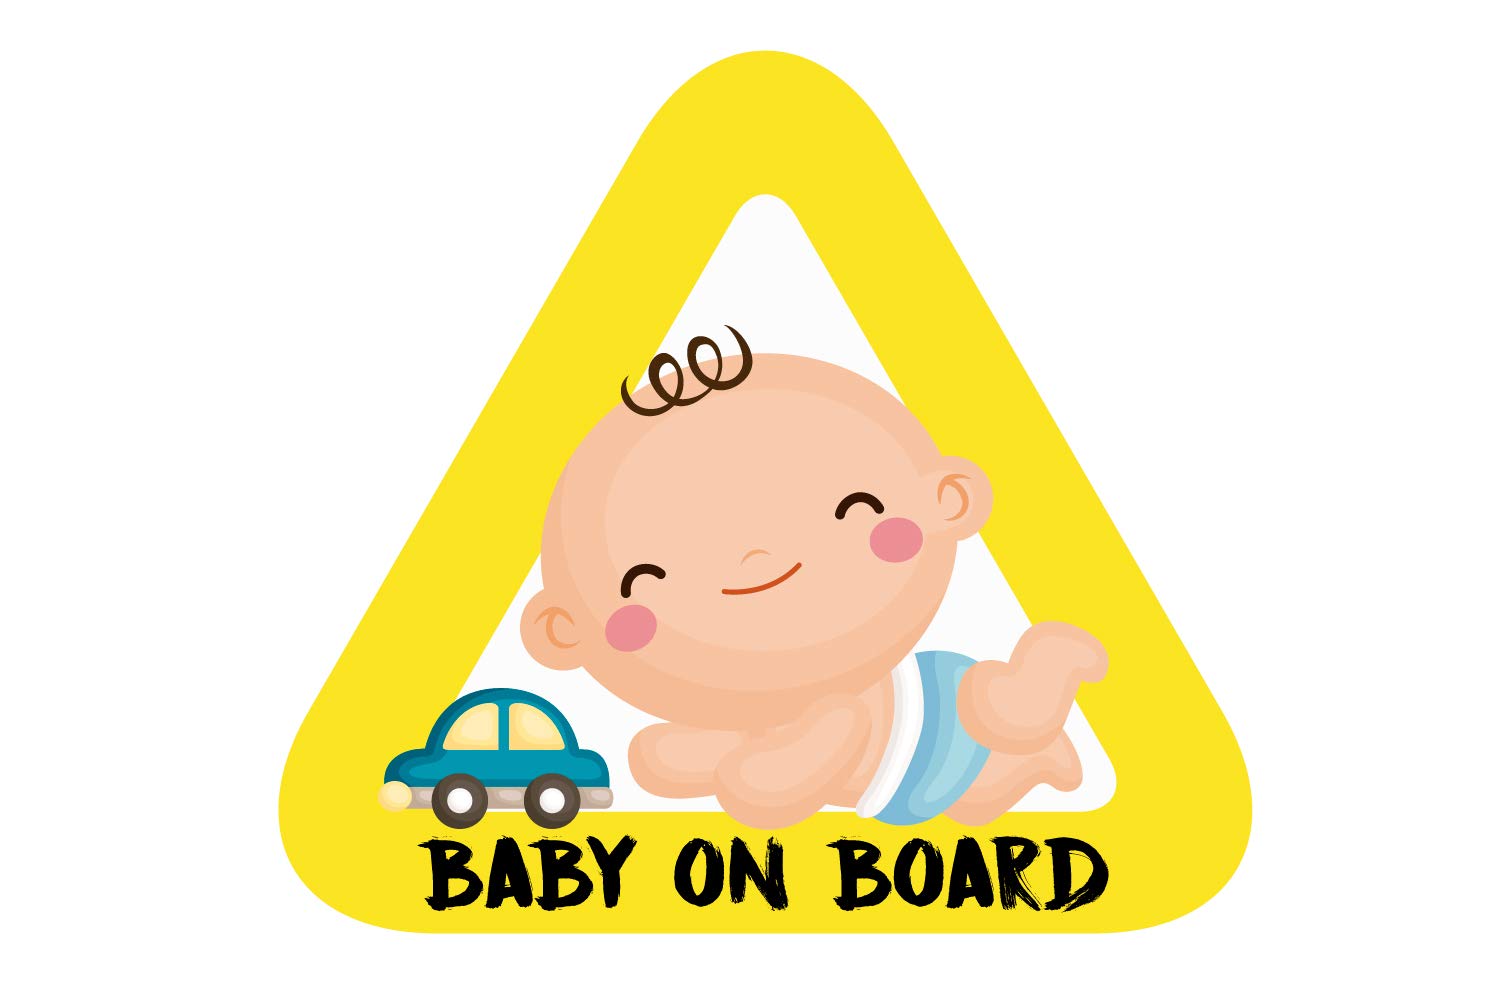 Baby on Board Sticker Sign for The car. Yellow Adhesive Vinyl Also for Motorcycles. 15 x 13'7 cm. (1. Baby)